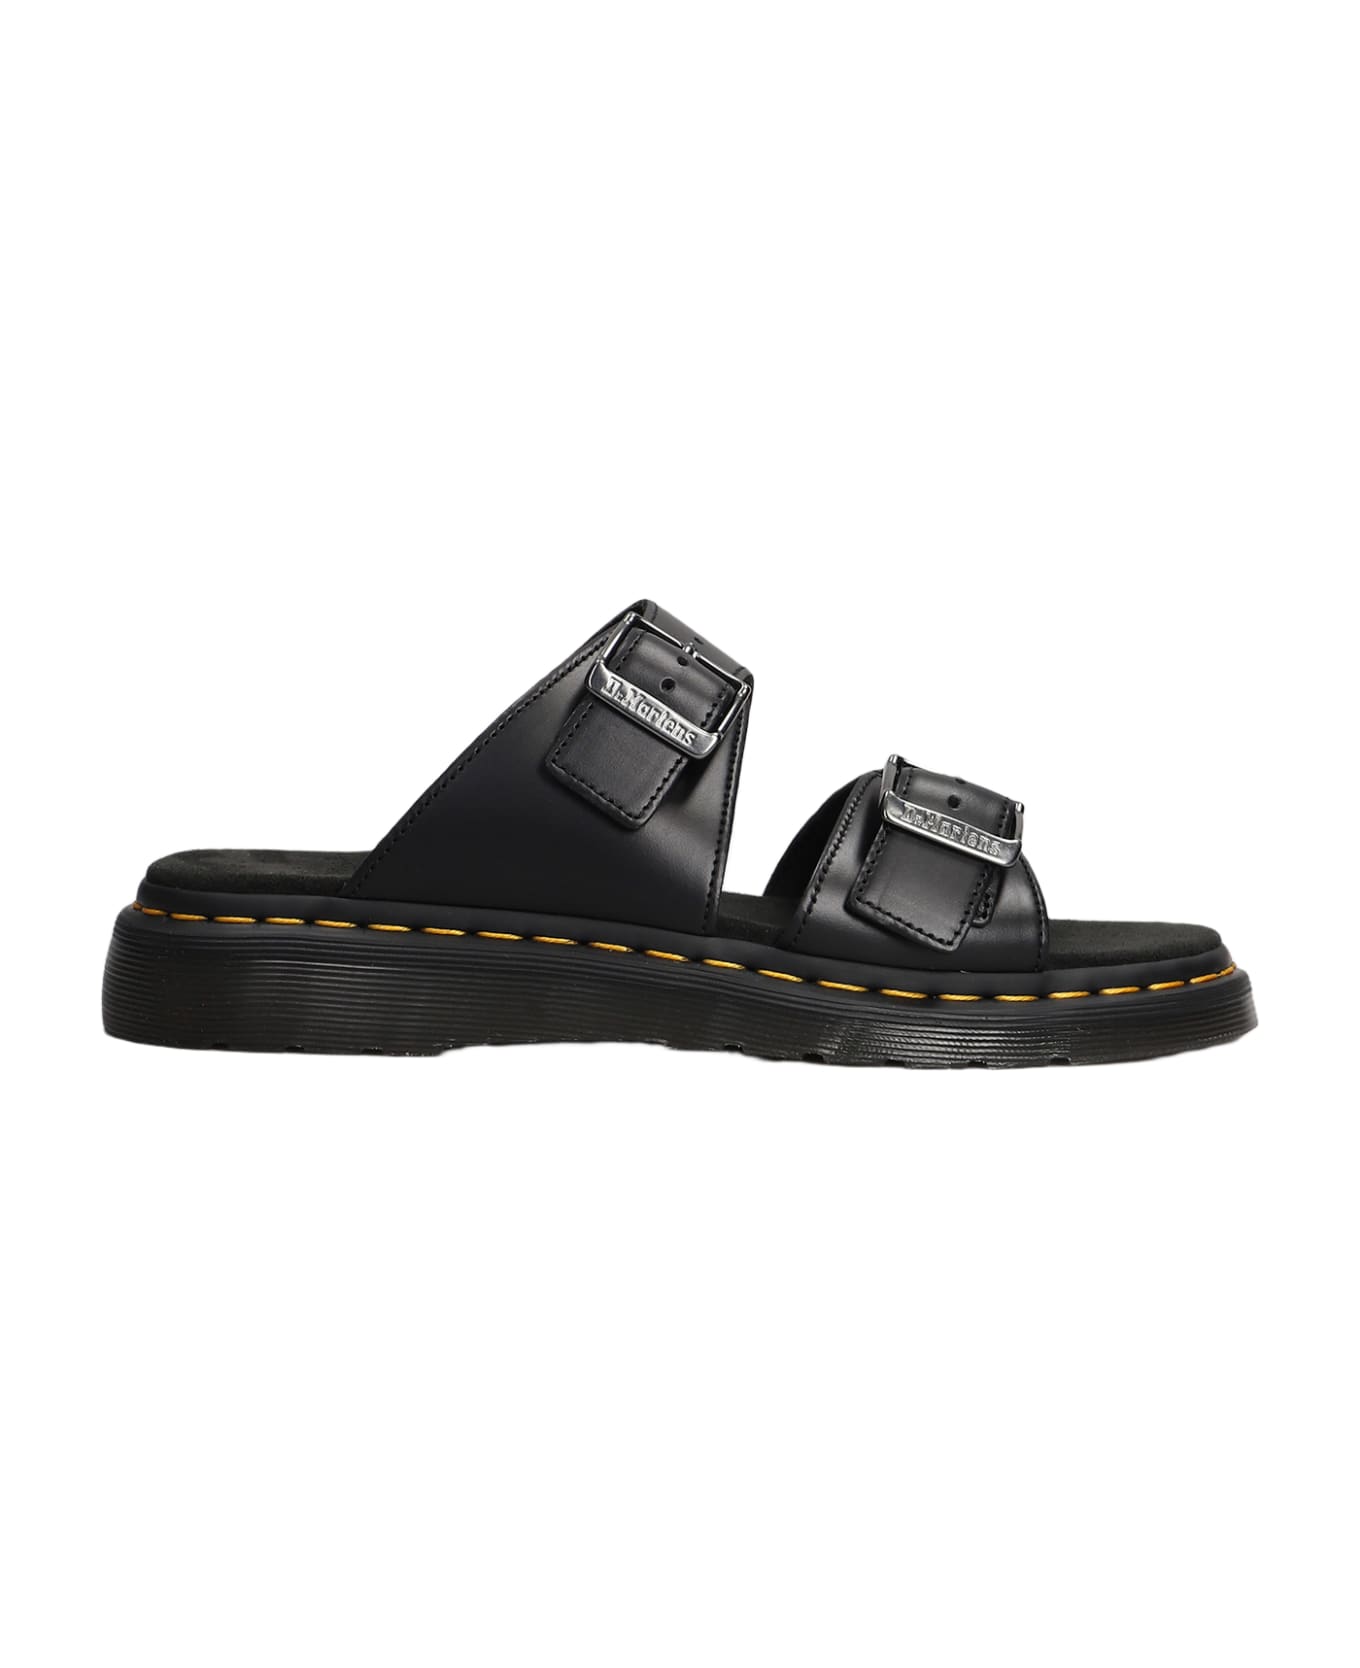 Dr. Martens Josef Flats In Black Leather - black その他各種シューズ